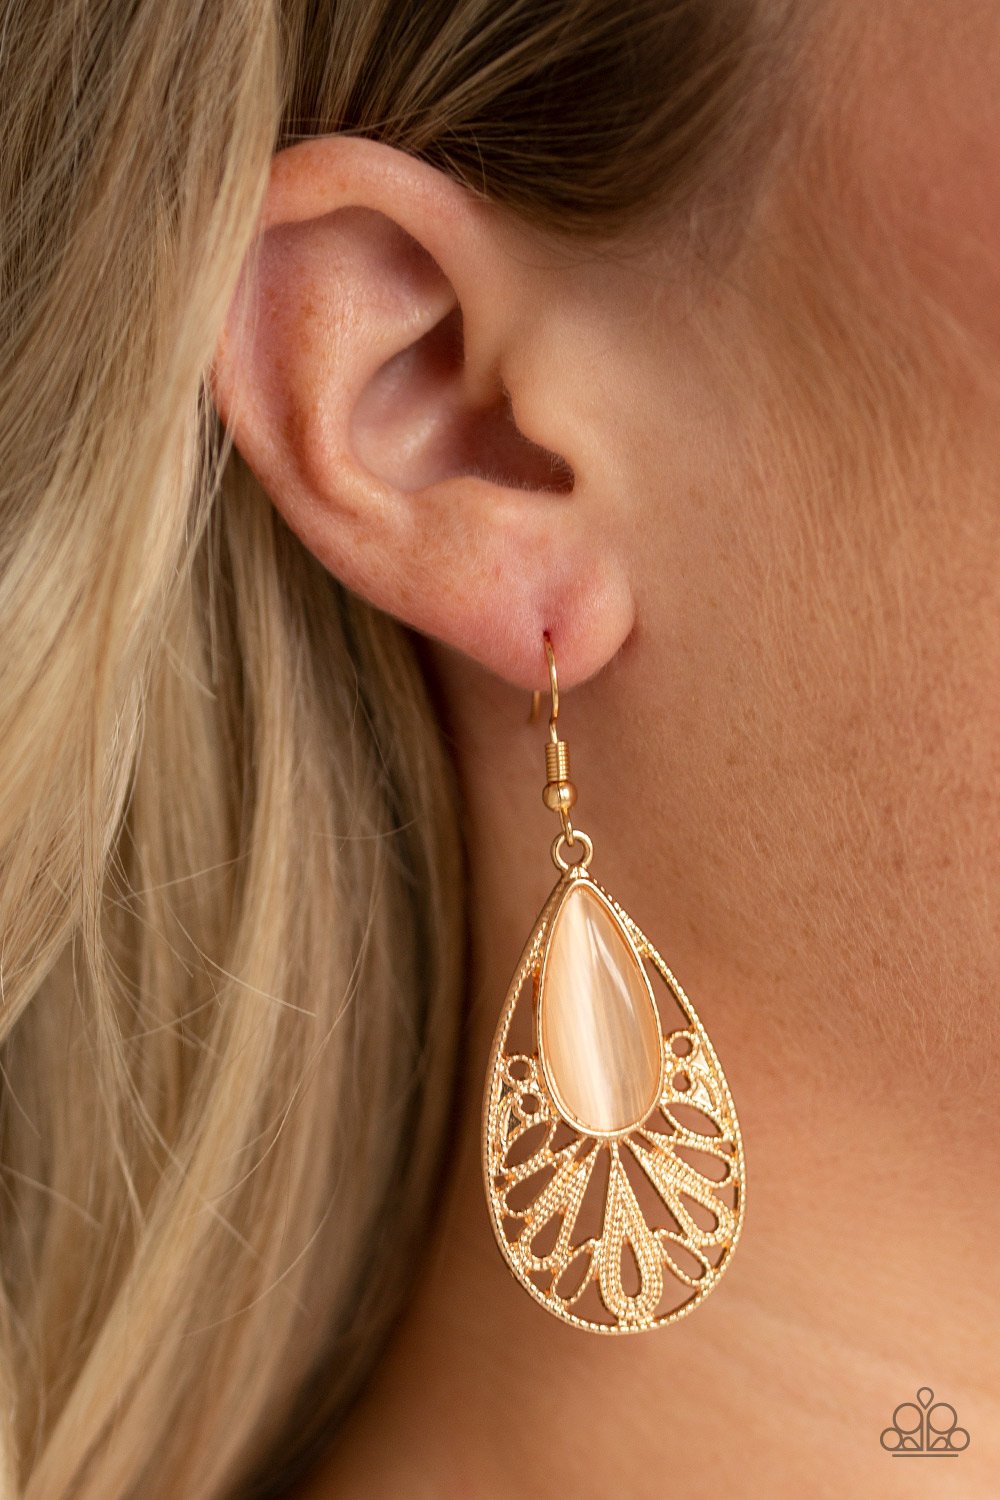 GLOWING TRANQUILITY - GOLD Moonstone Earrings